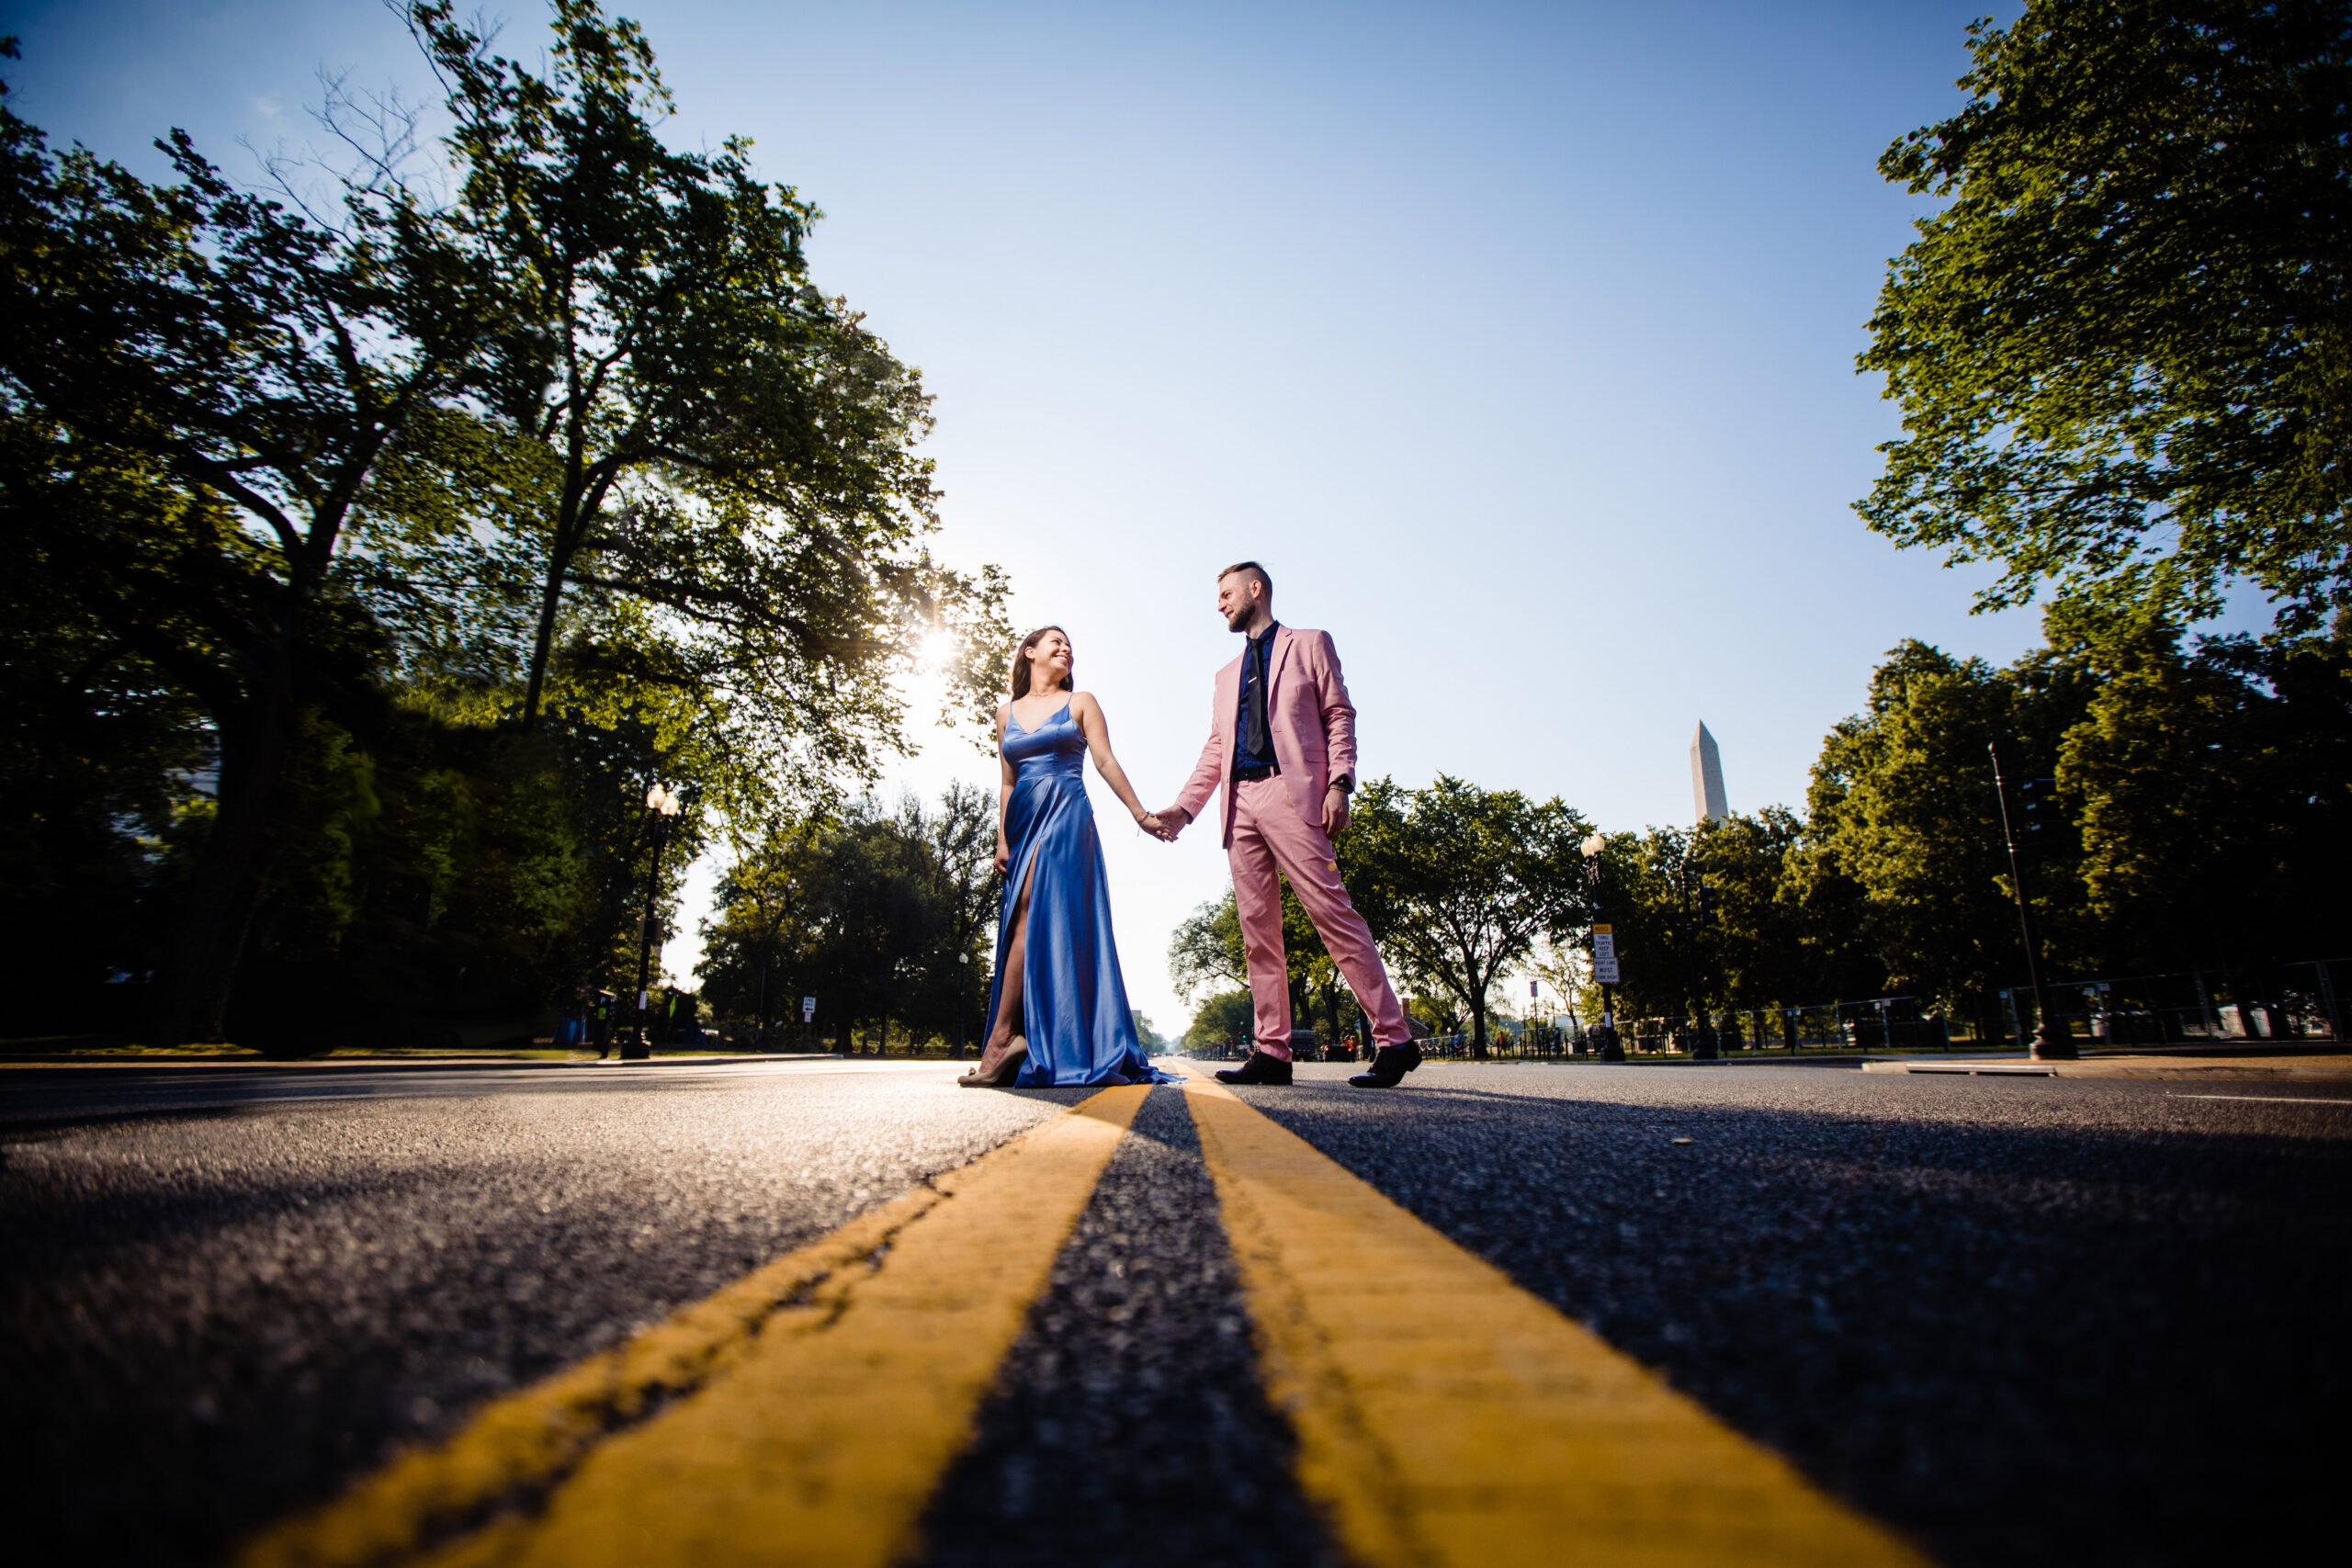 A romantic elopement moment captured on the streets of Washington DC as the couple walks hand in hand. The cityscape provides a picturesque backdrop for their love story, skillfully captured by North Jersey wedding photographer Jarot Bocanegra